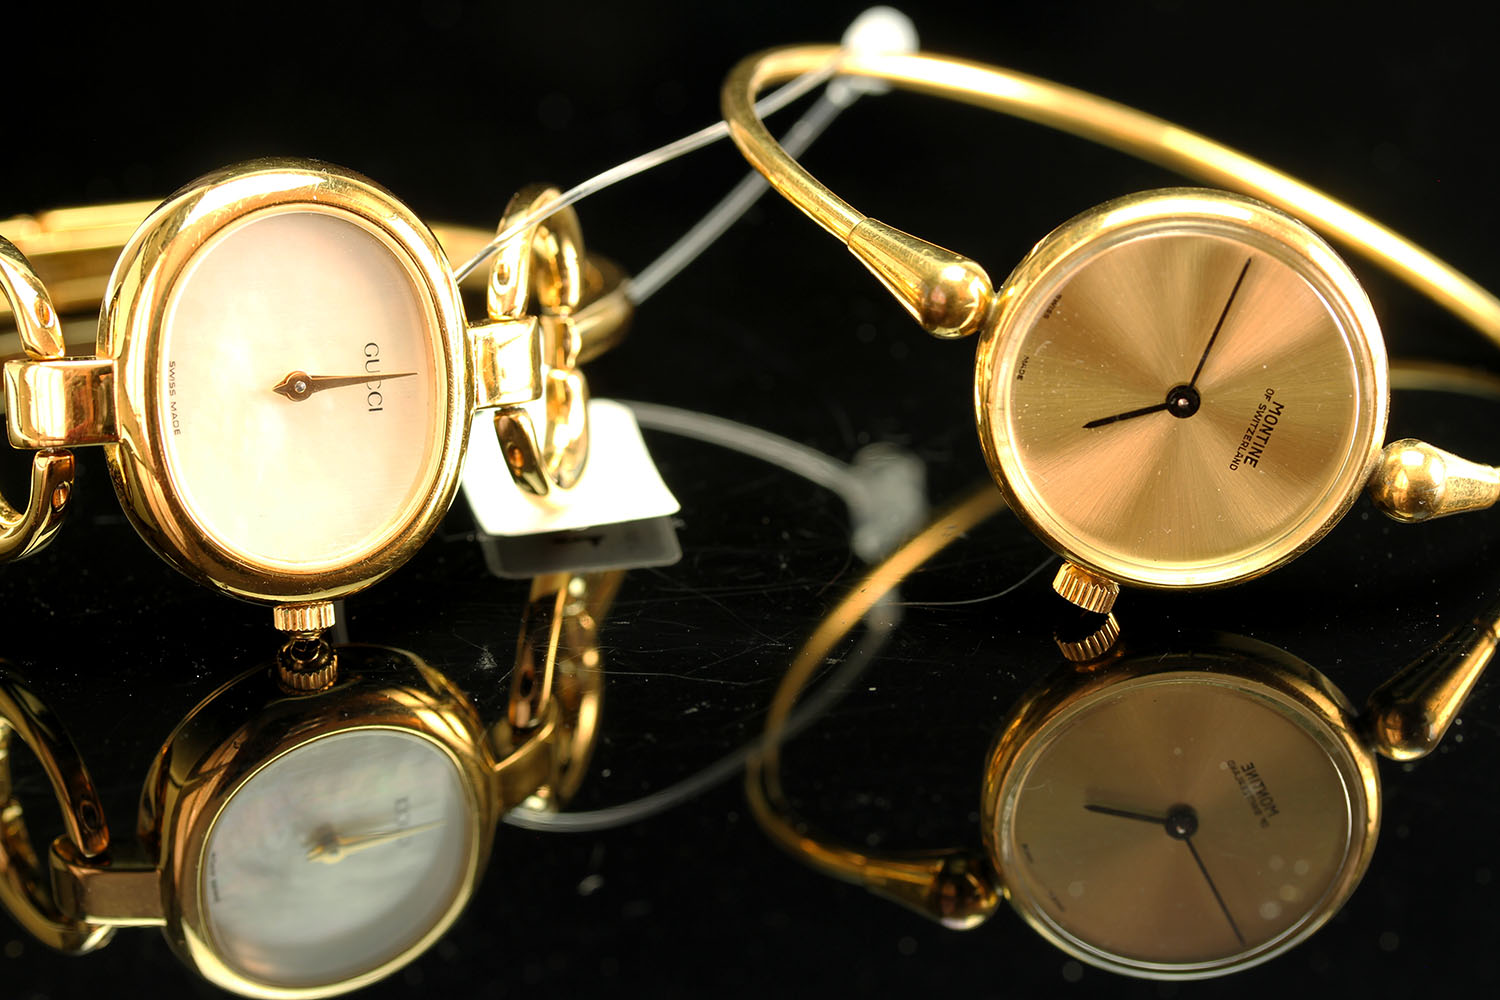 ***TO BE SOLD WITHOUT RESERVE*** GROUP OF 2 LADIES WATCHES INCLUDING GUCCI AND MONTINE, Gucci - oval